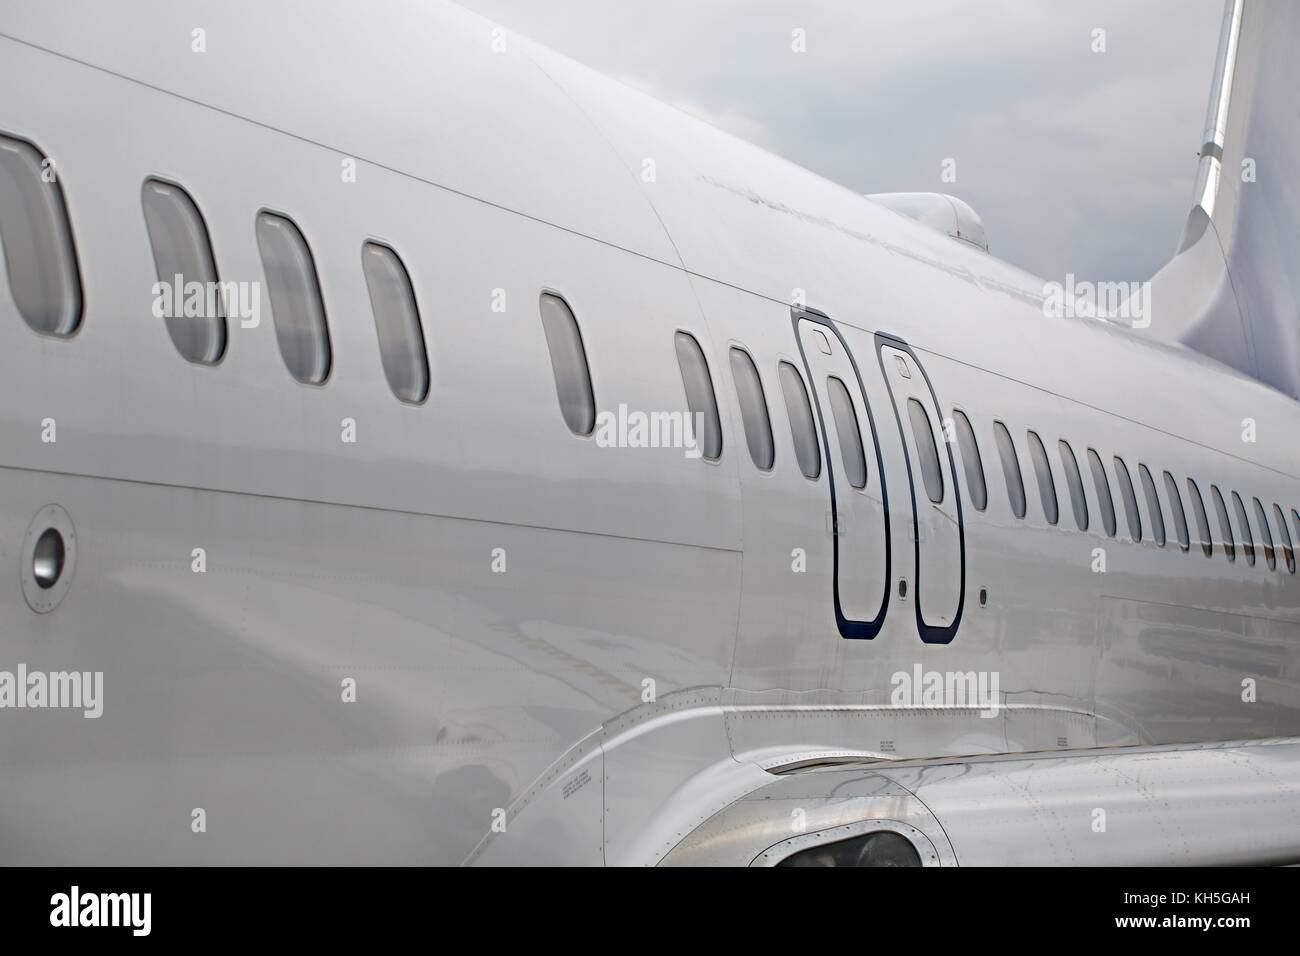 Airliner fuselage closeup Stock Photo